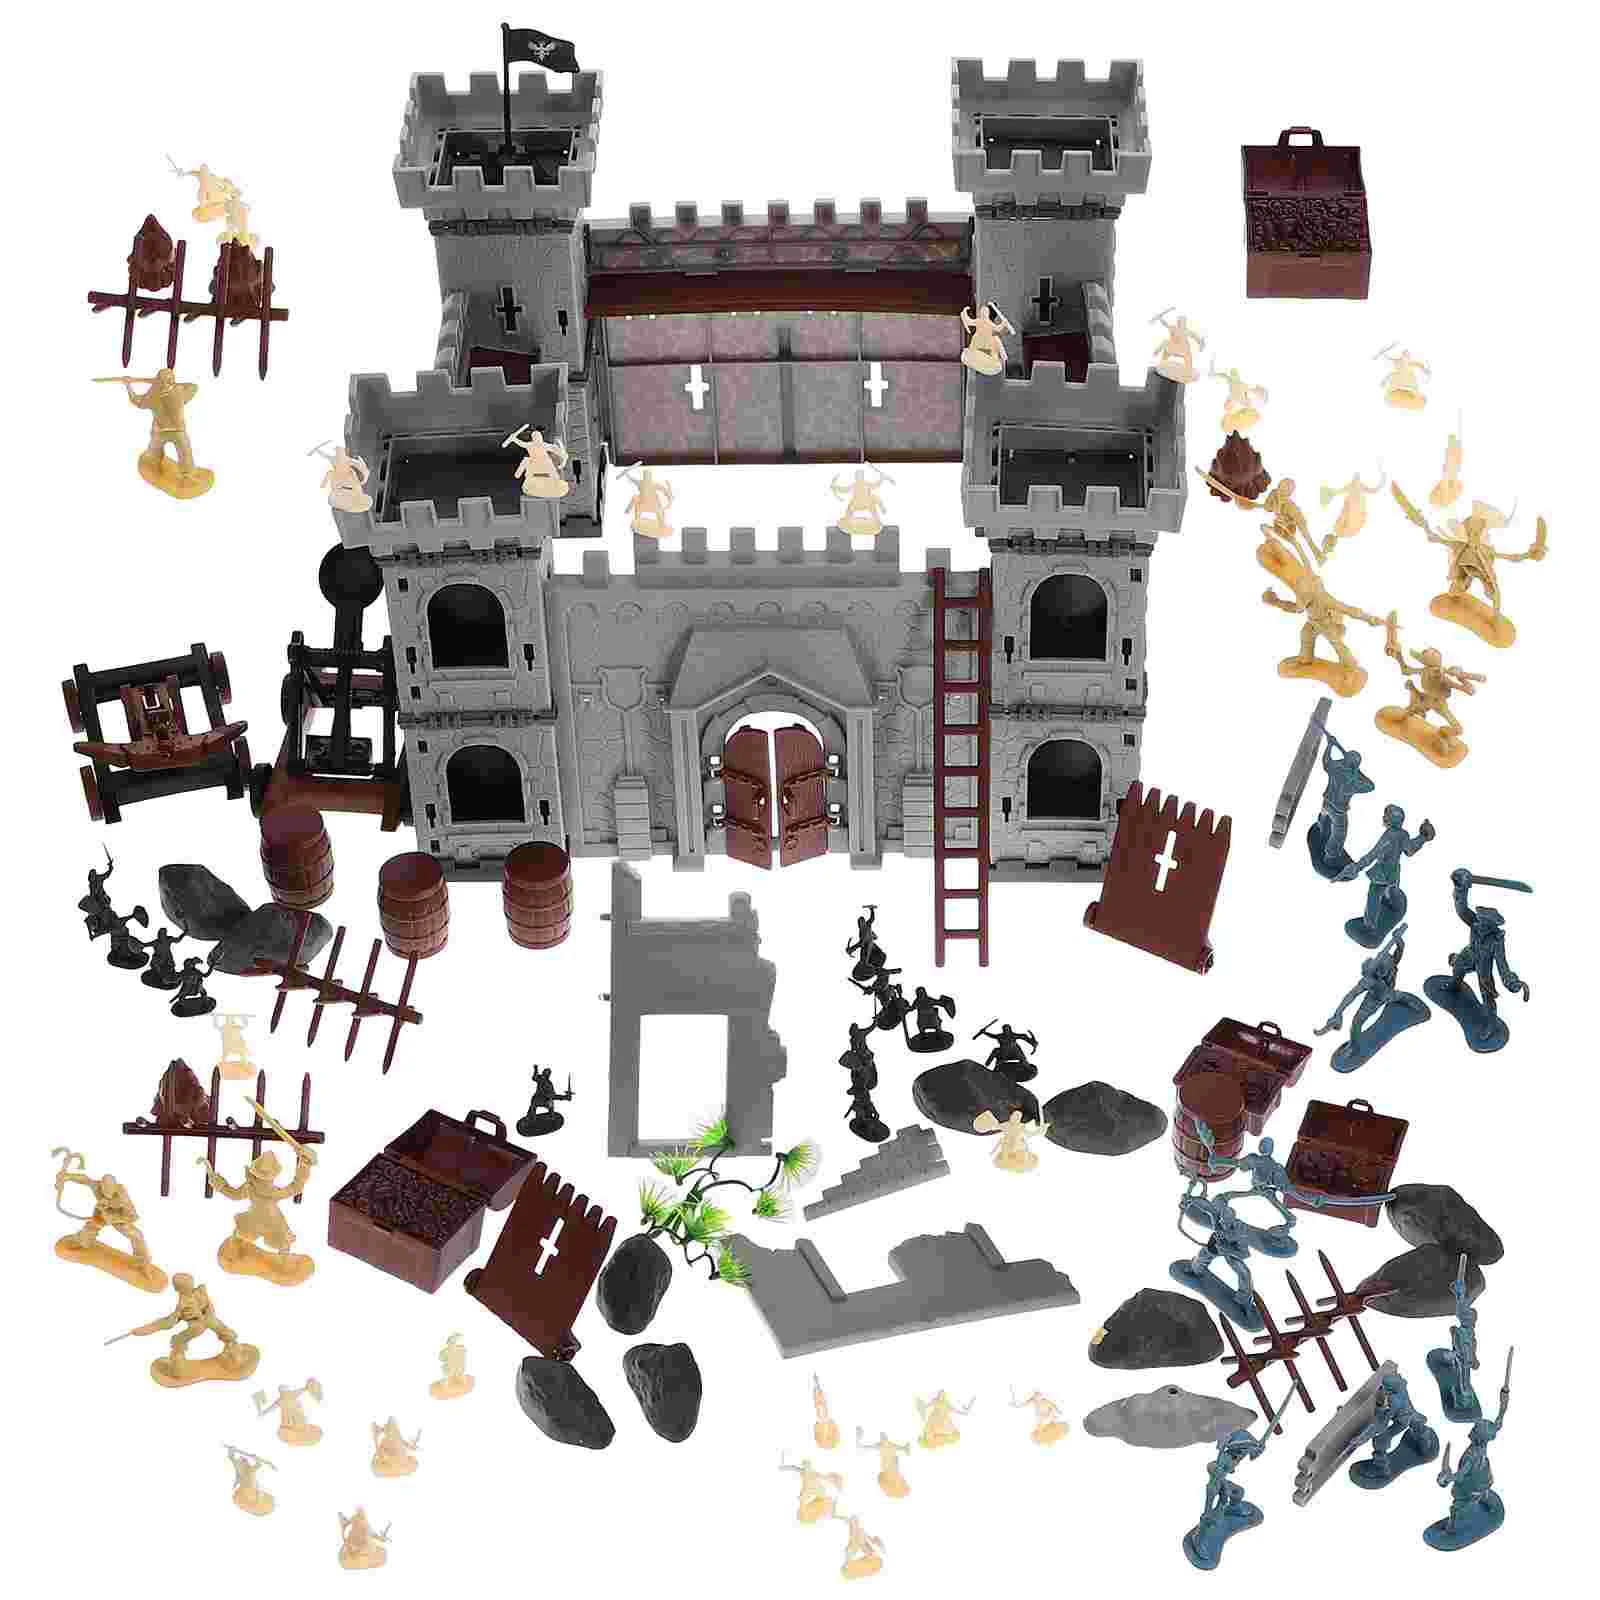 

Pirate Props Pirates Toys Accessories Medieval Castle Knight Plastic with Accessory Child Kids